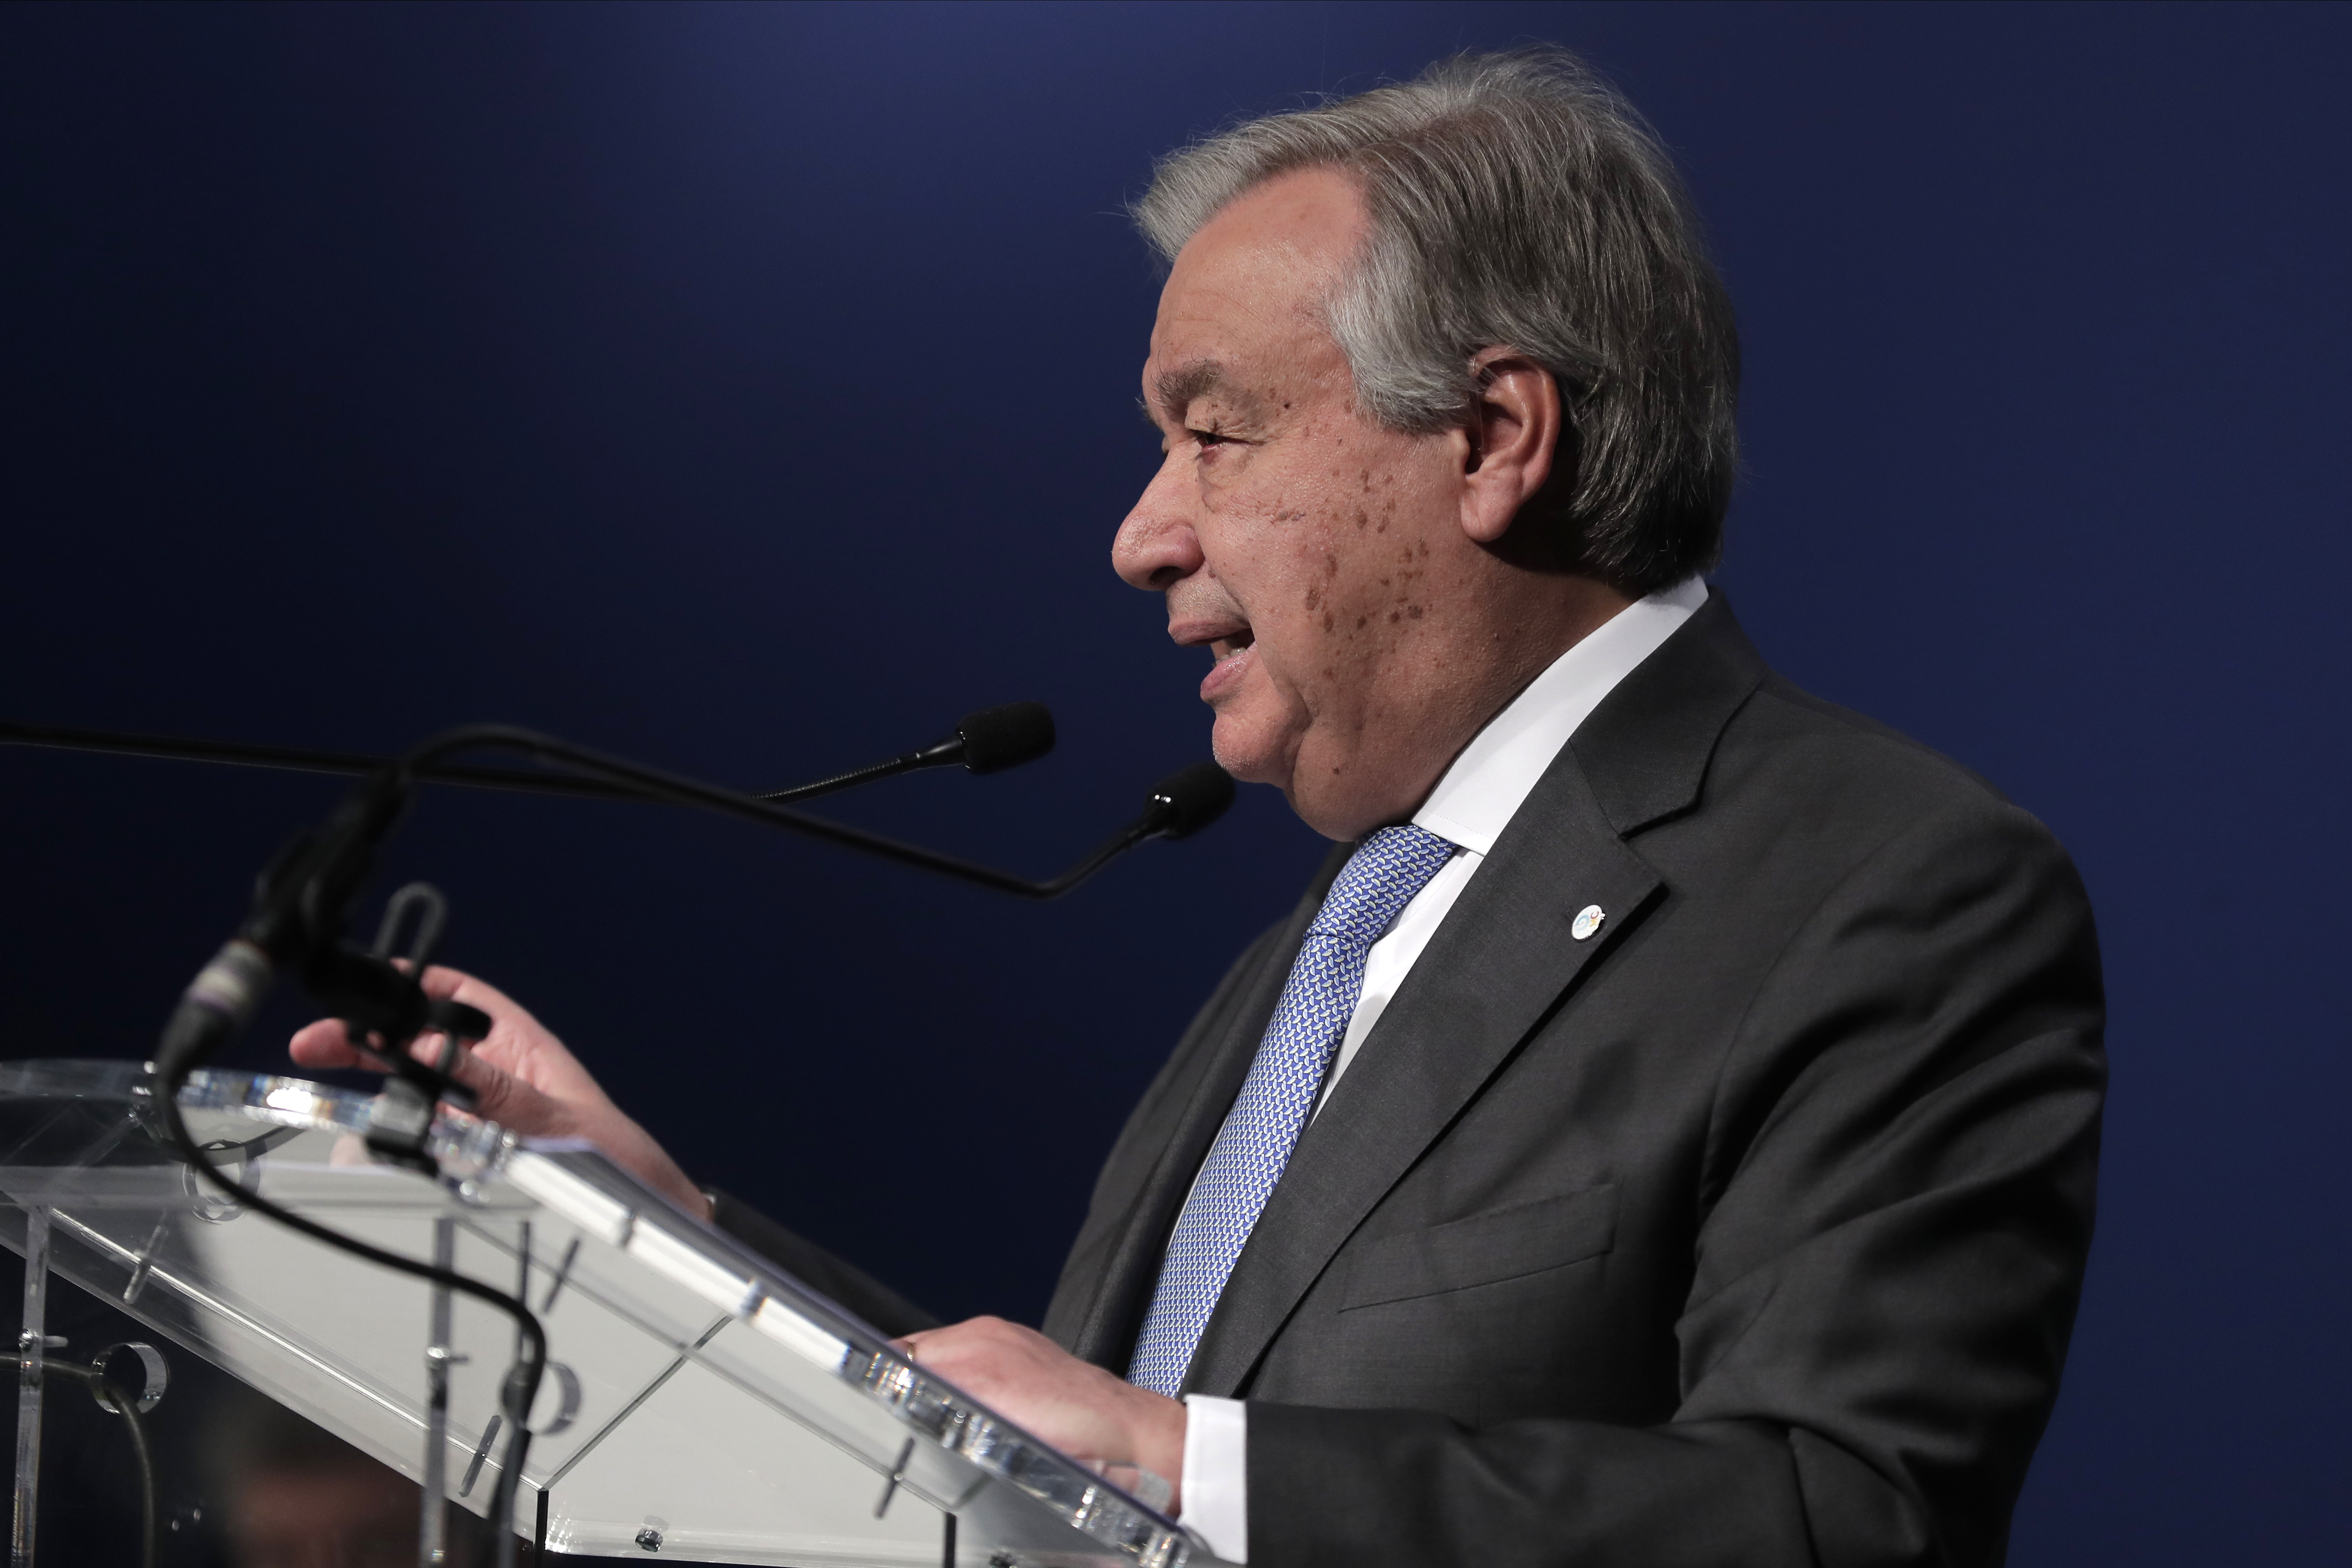 Antonio Guterres, Secretary-General of the United Nations delivers a speech at the COP25 climate talks summit in Madrid, Spain, on December 12, 2019